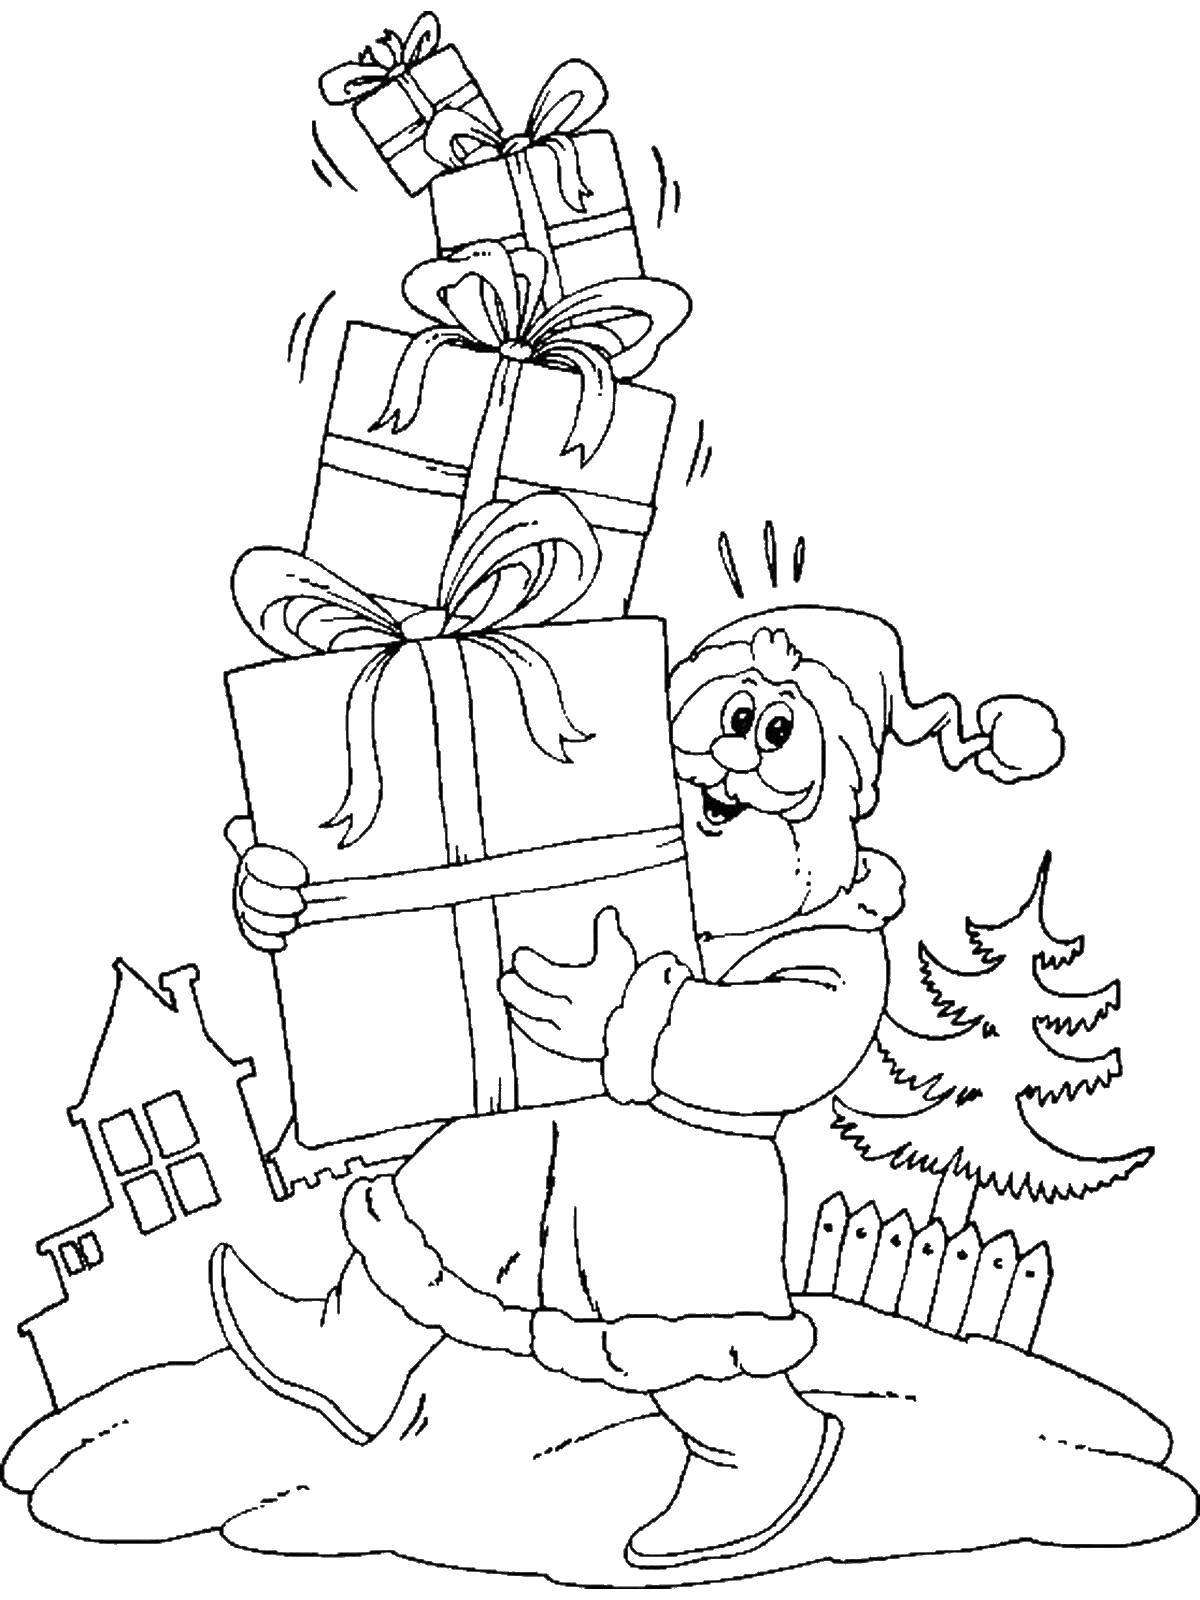 Coloring Santa Claus with gifts. Category Coloring pages for kids. Tags:  boxes, Santa Claus.